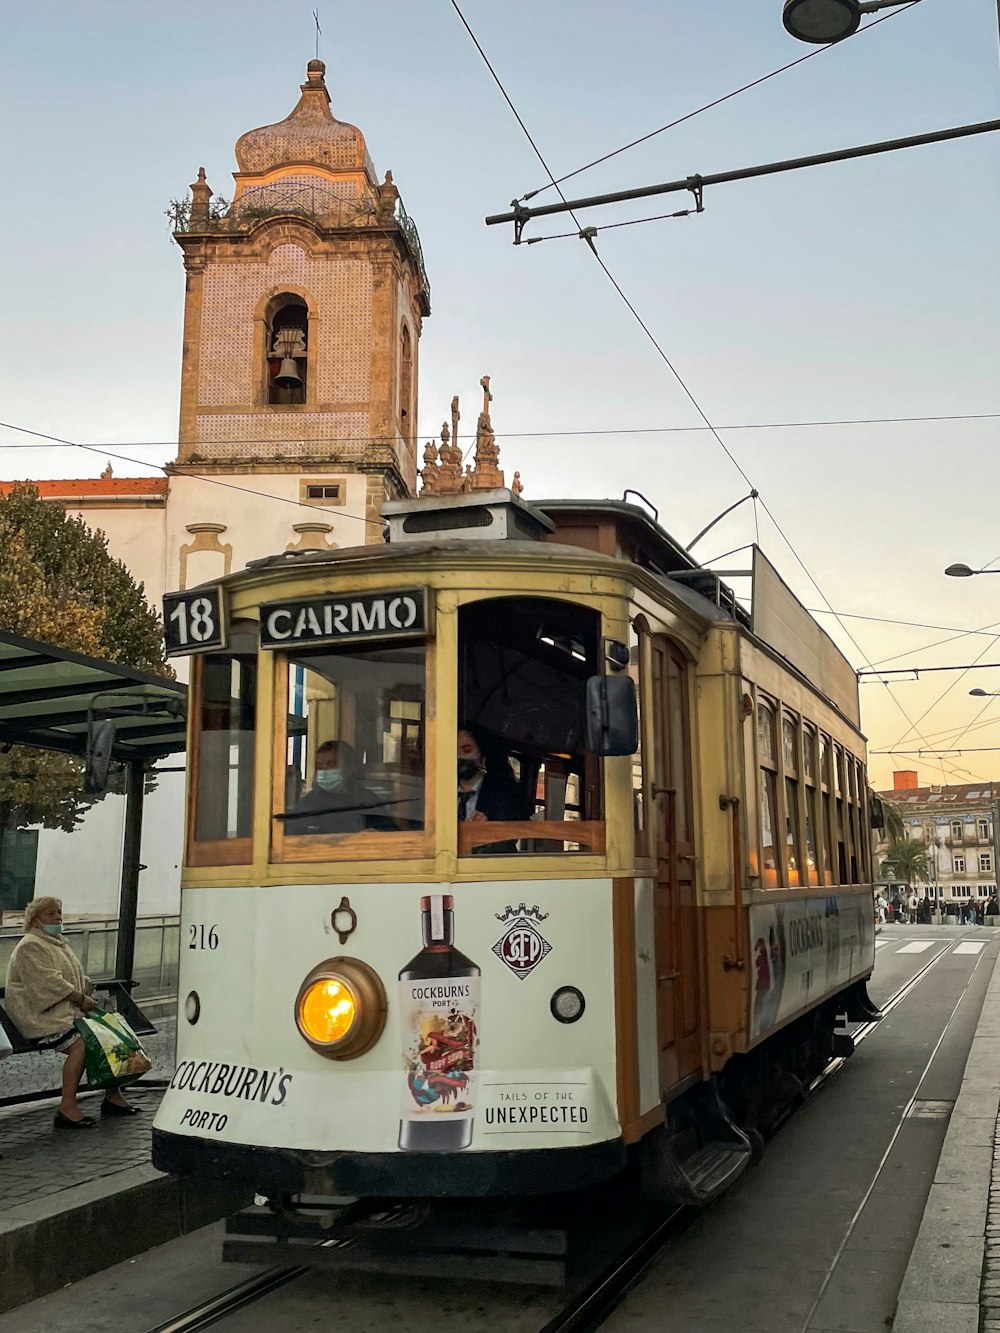 a trolley car on a city street with a clock tower in the background